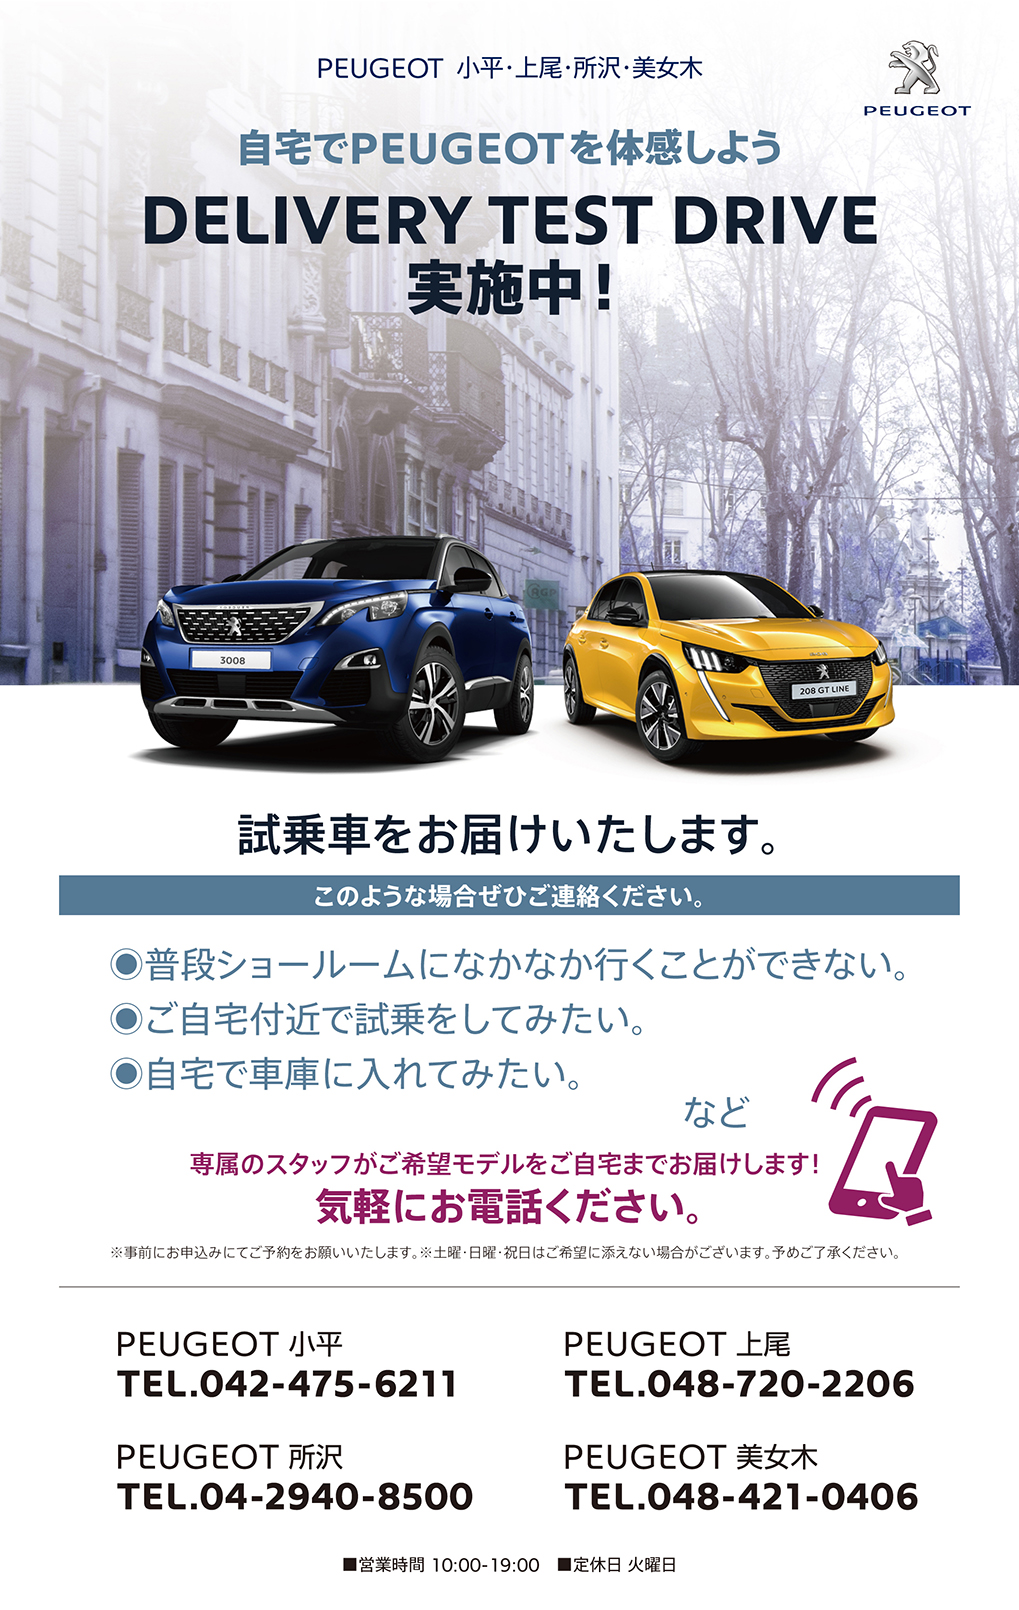 Delivery　Test　Drive　好評実施中！